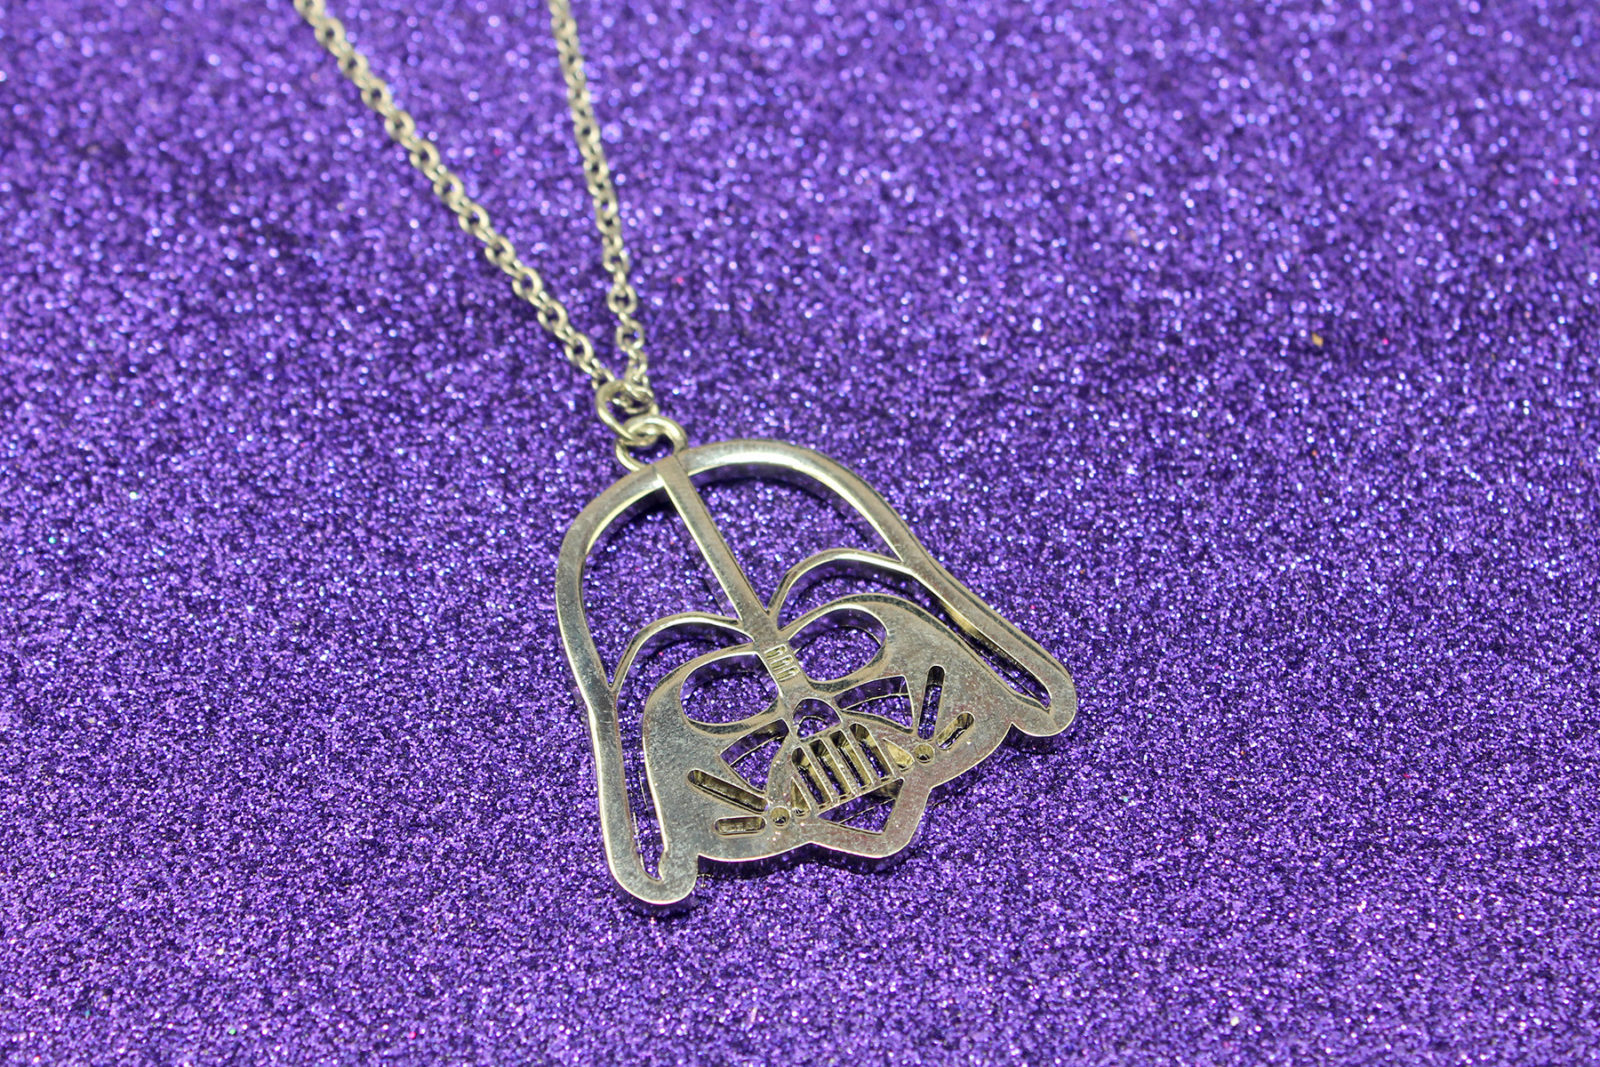 Review – Loungefly Darth Vader necklace